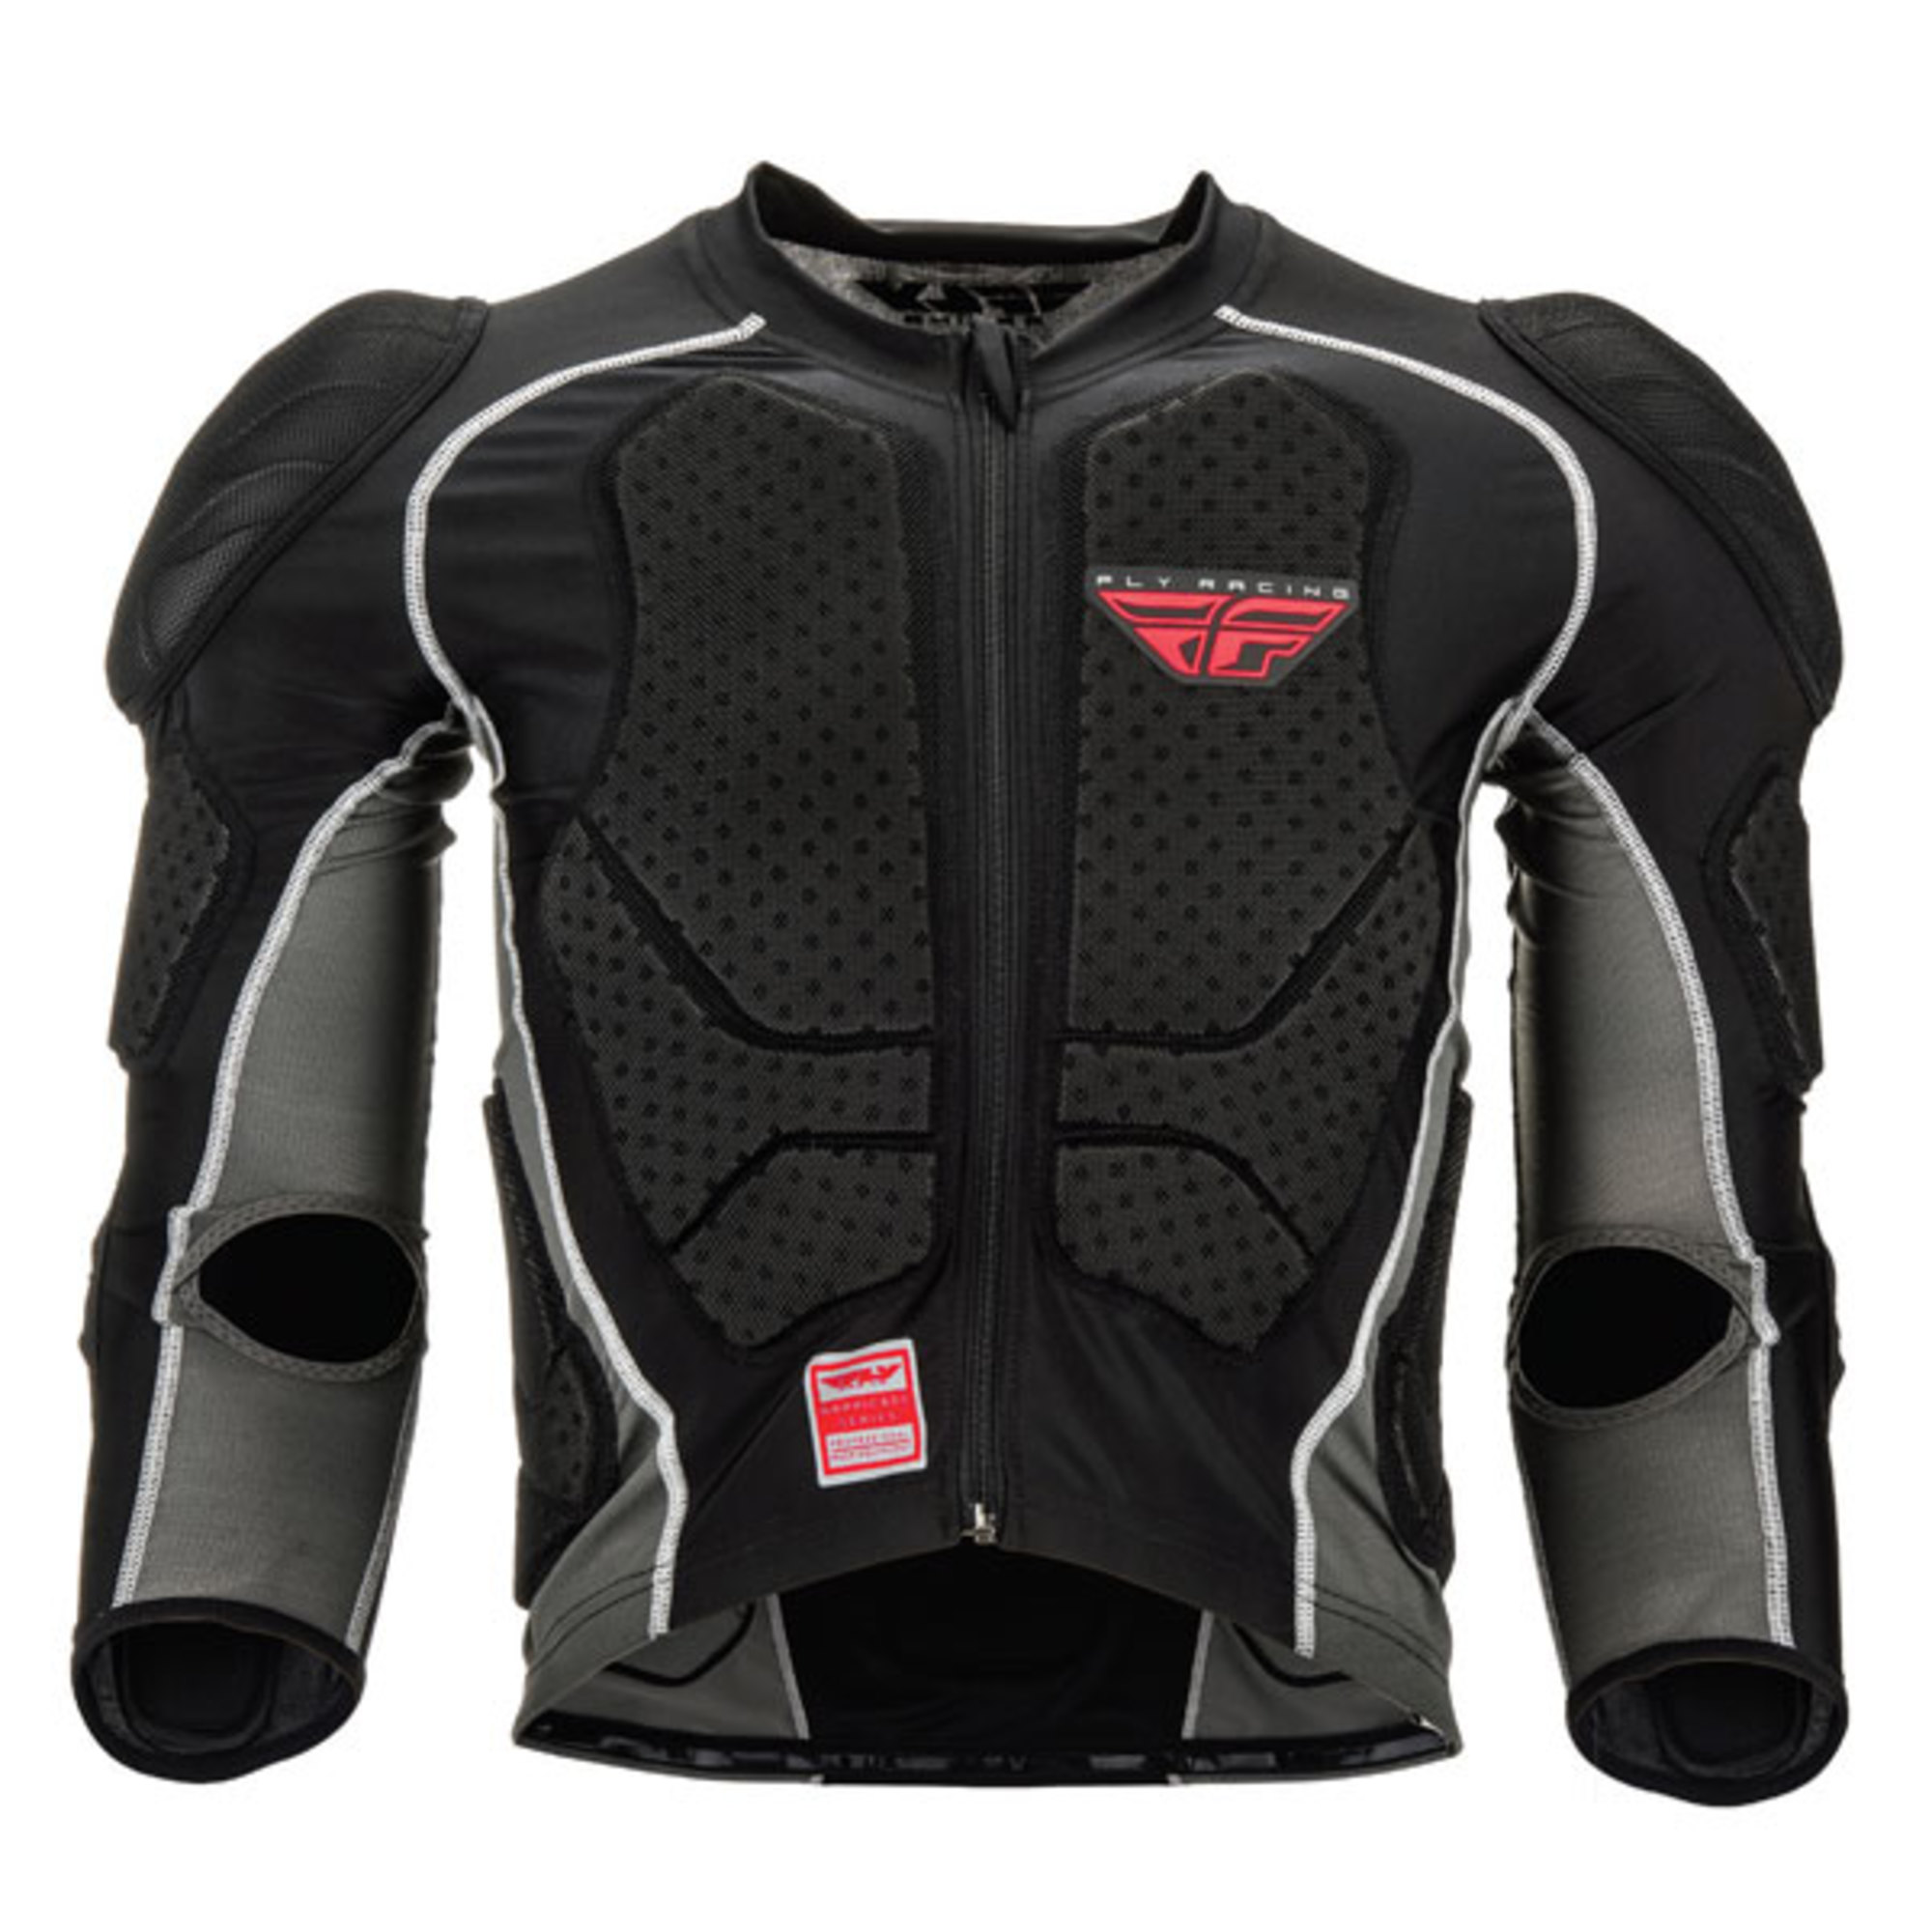 fly racing roost deflectors protections for kids barricade long sleeve